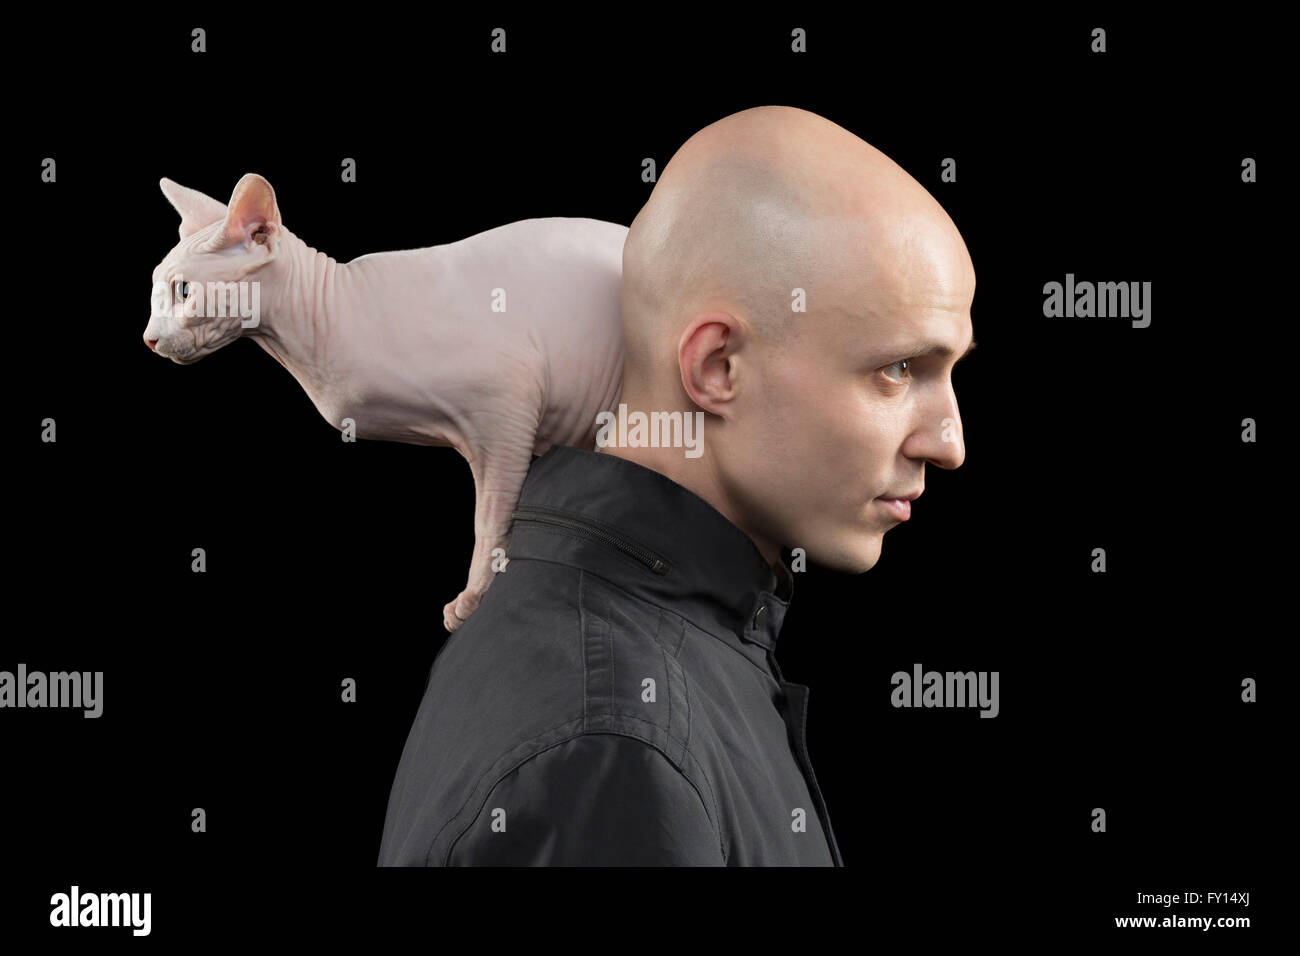 Side view of bald man carrying Sphynx hairless cat on shoulder against black background Stock Photo